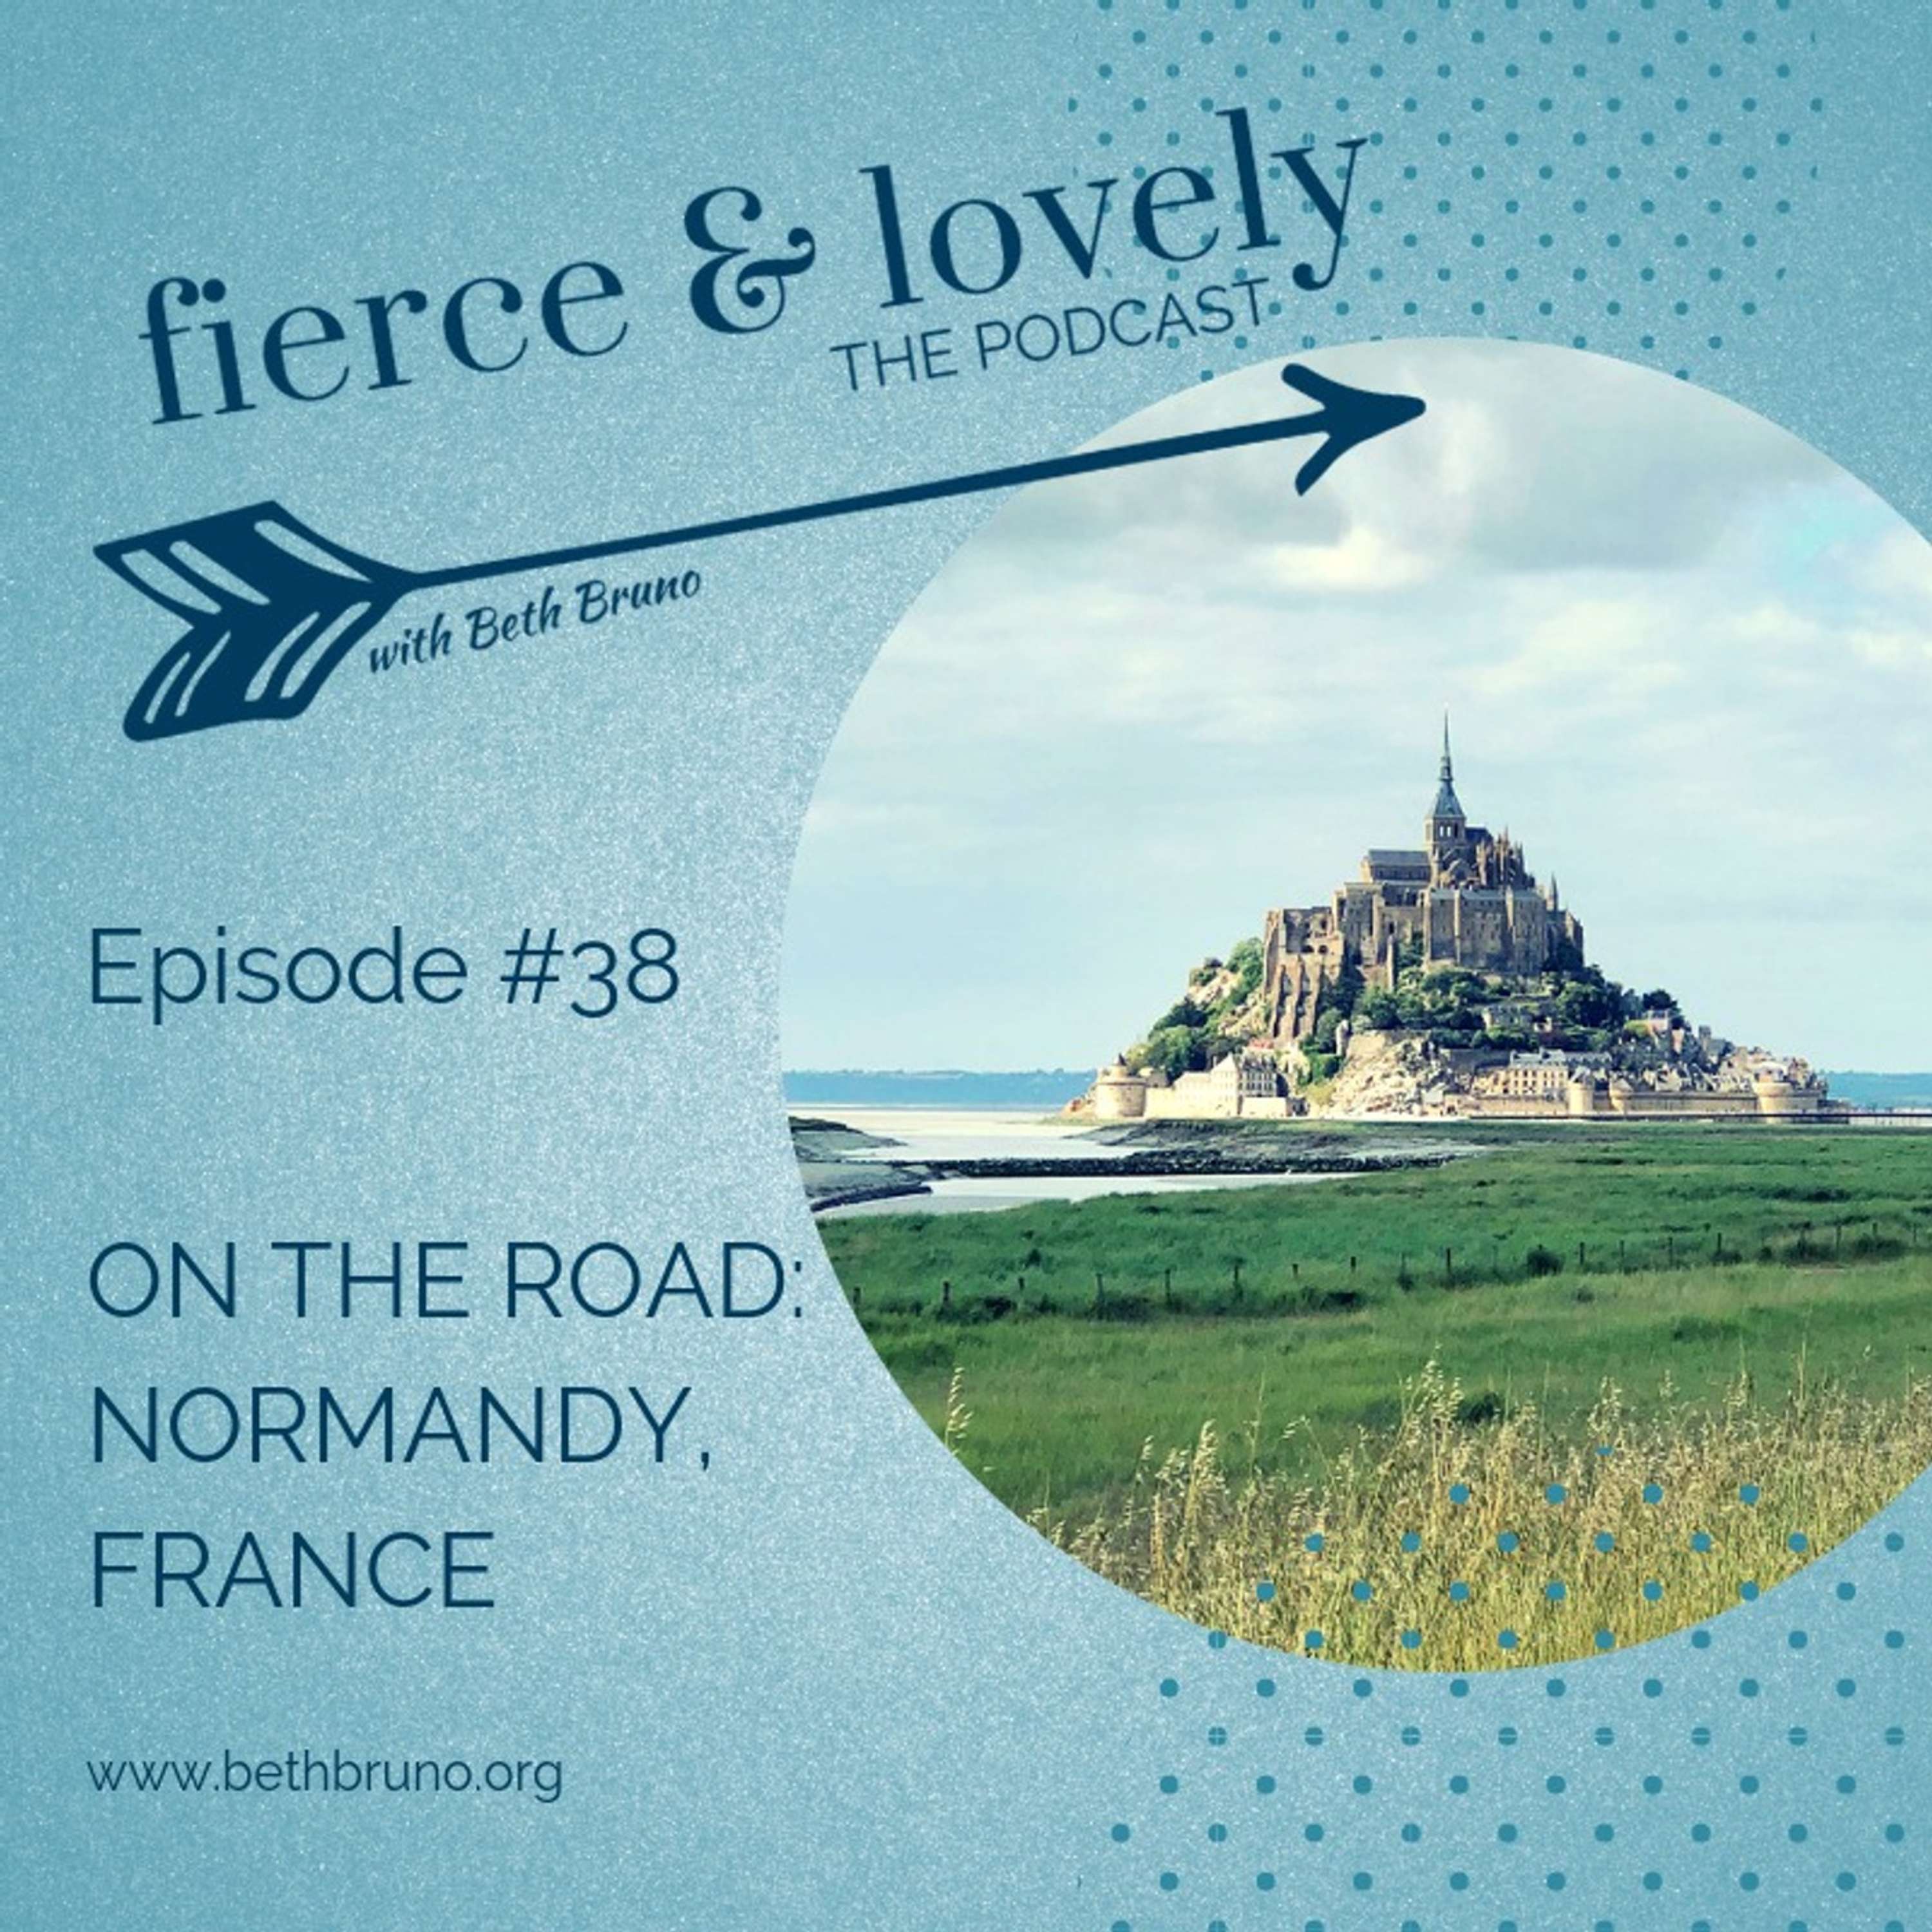 On the Road: Normandy, France